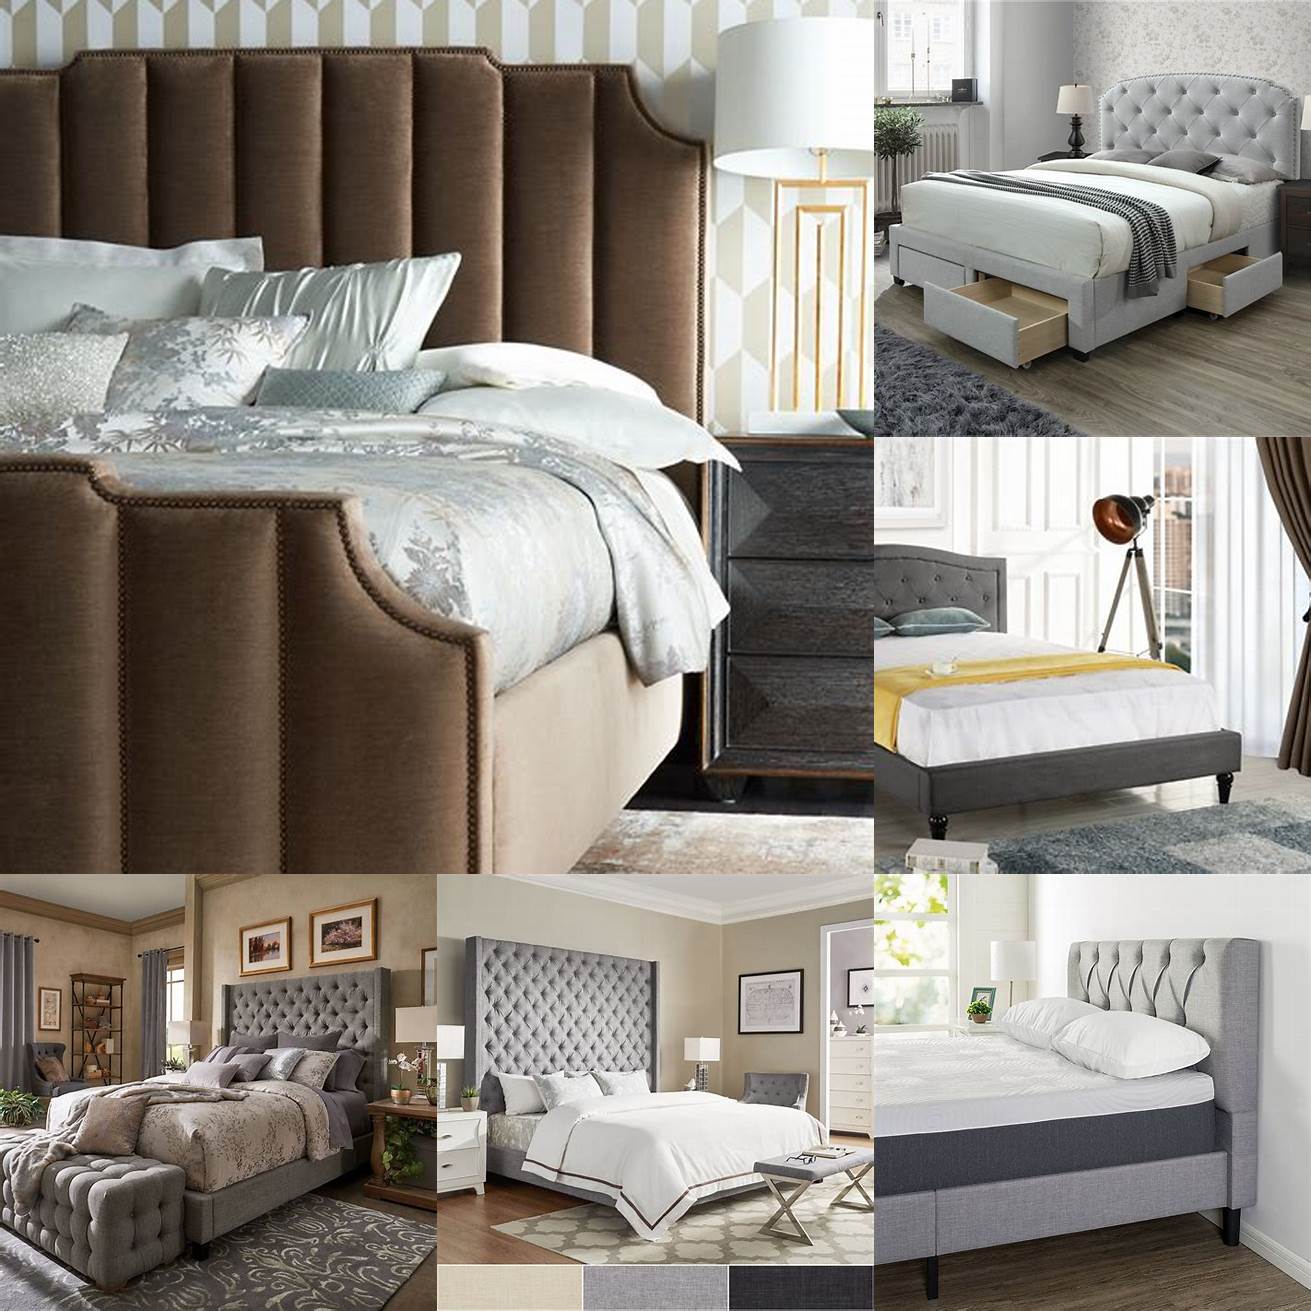 Check the quality of the materials Look for a tufted bed that is made of high-quality materials that are built to last